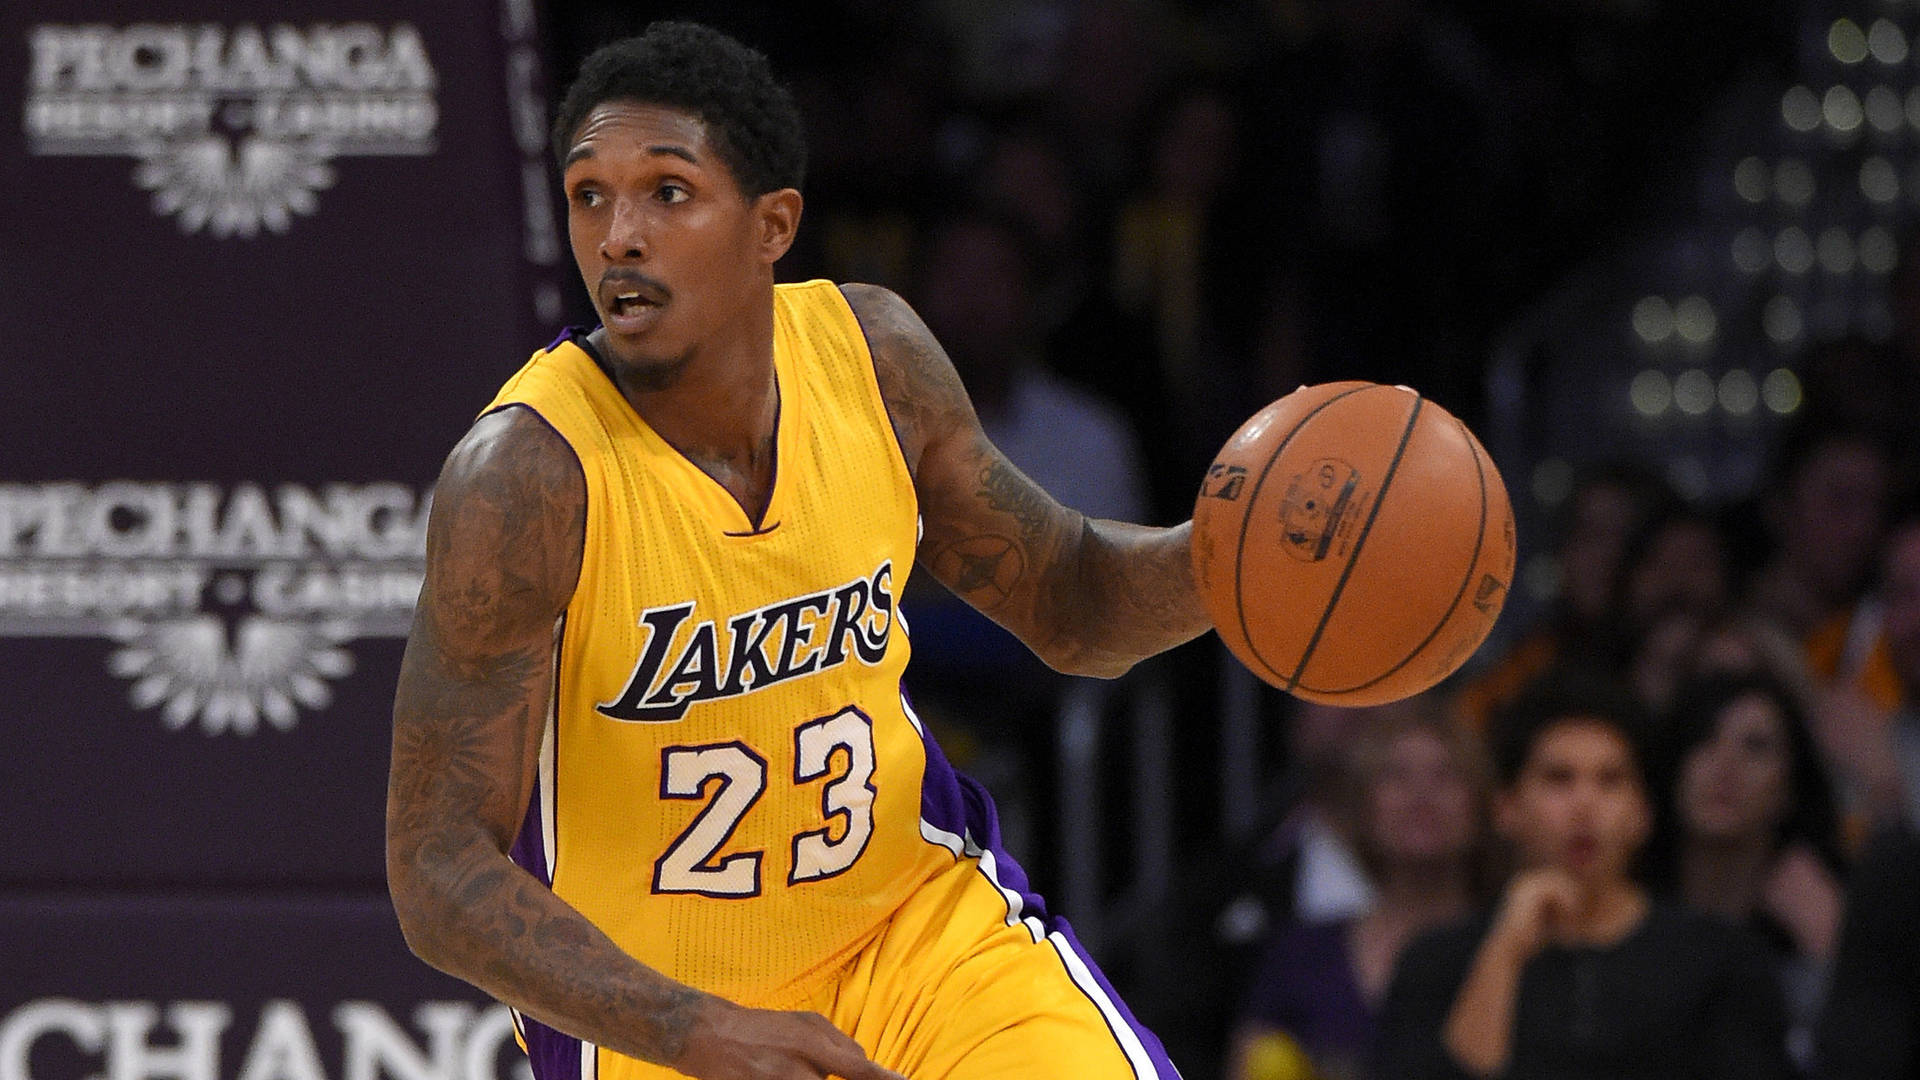 Lou Williams La Lakers Number 23 Background